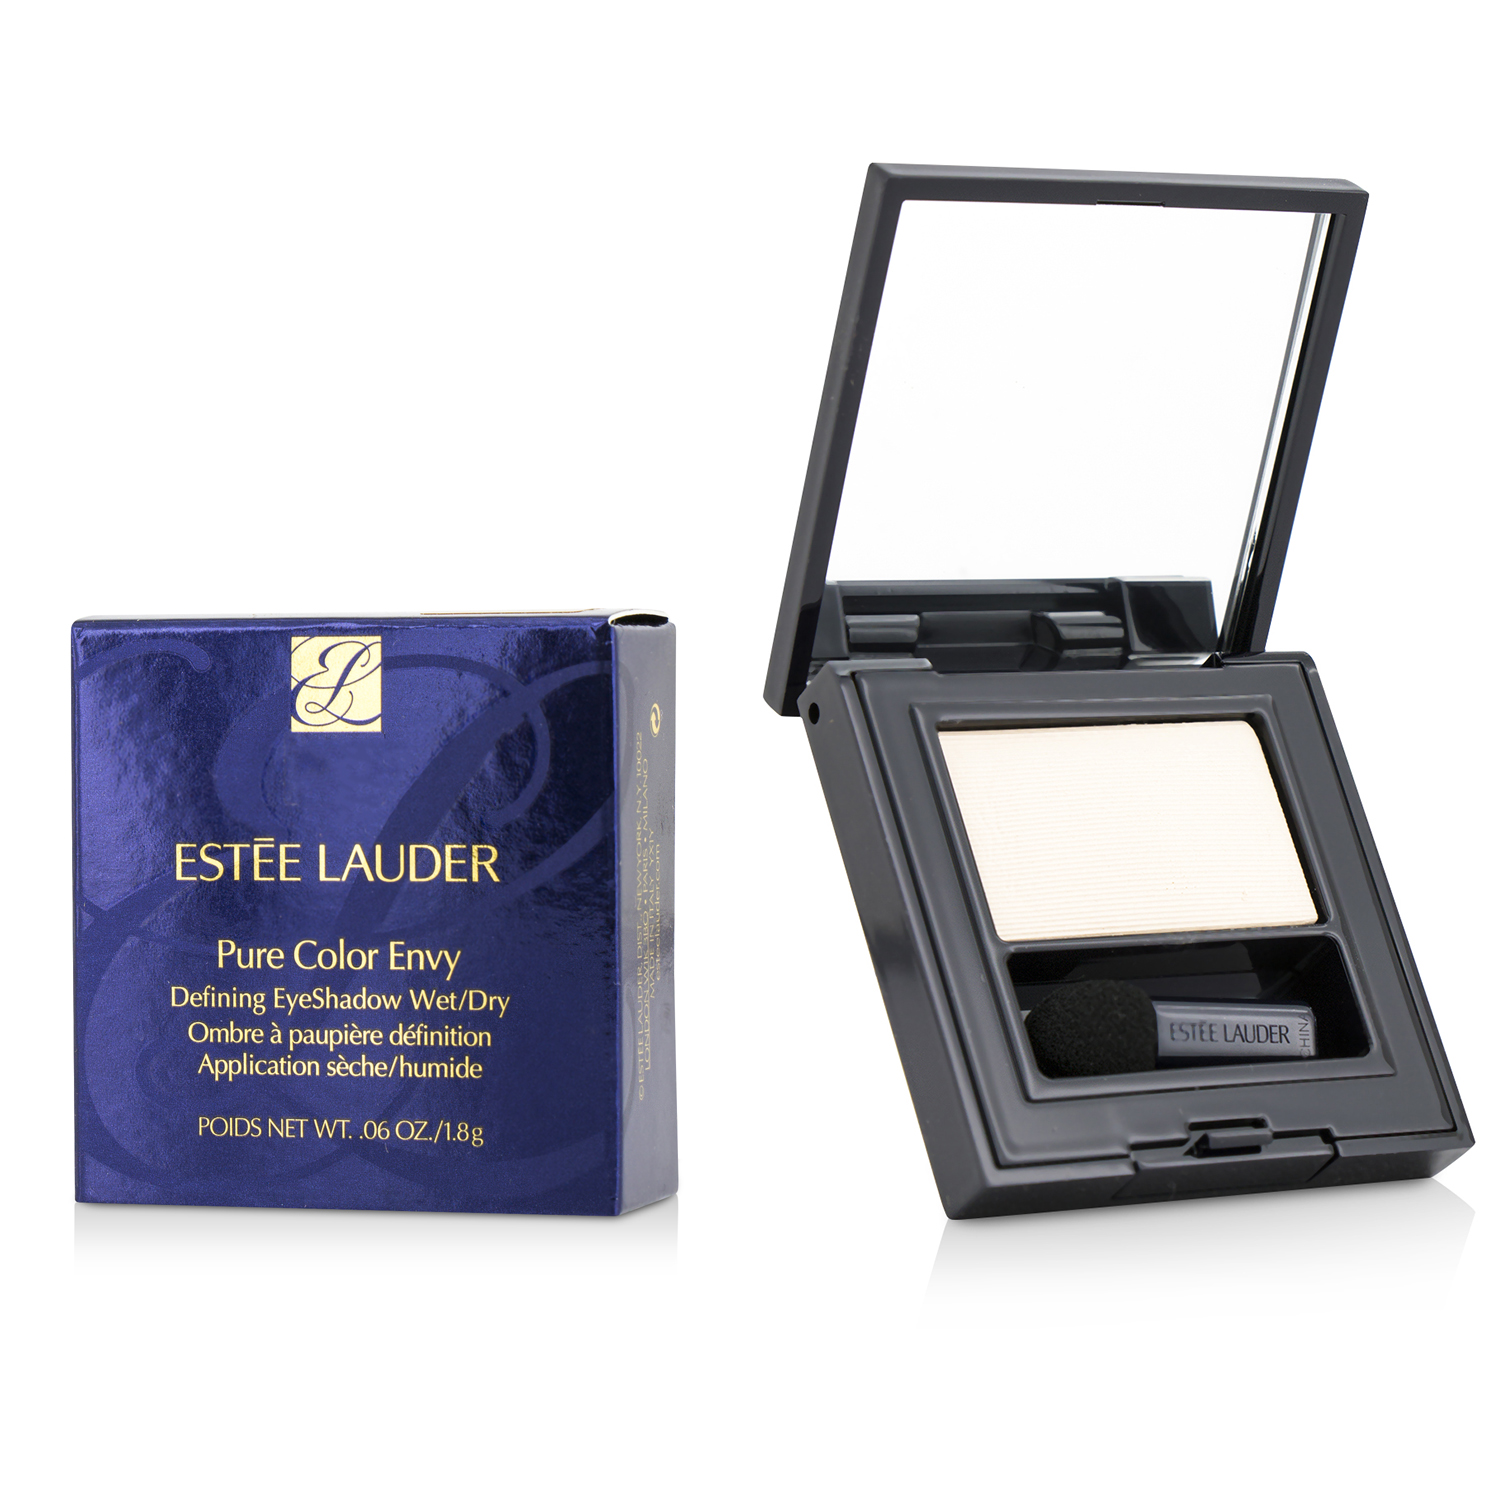 Pure Color Envy Defining EyeShadow Wet/Dry - # 28 Insolent Ivory Estee Lauder Image